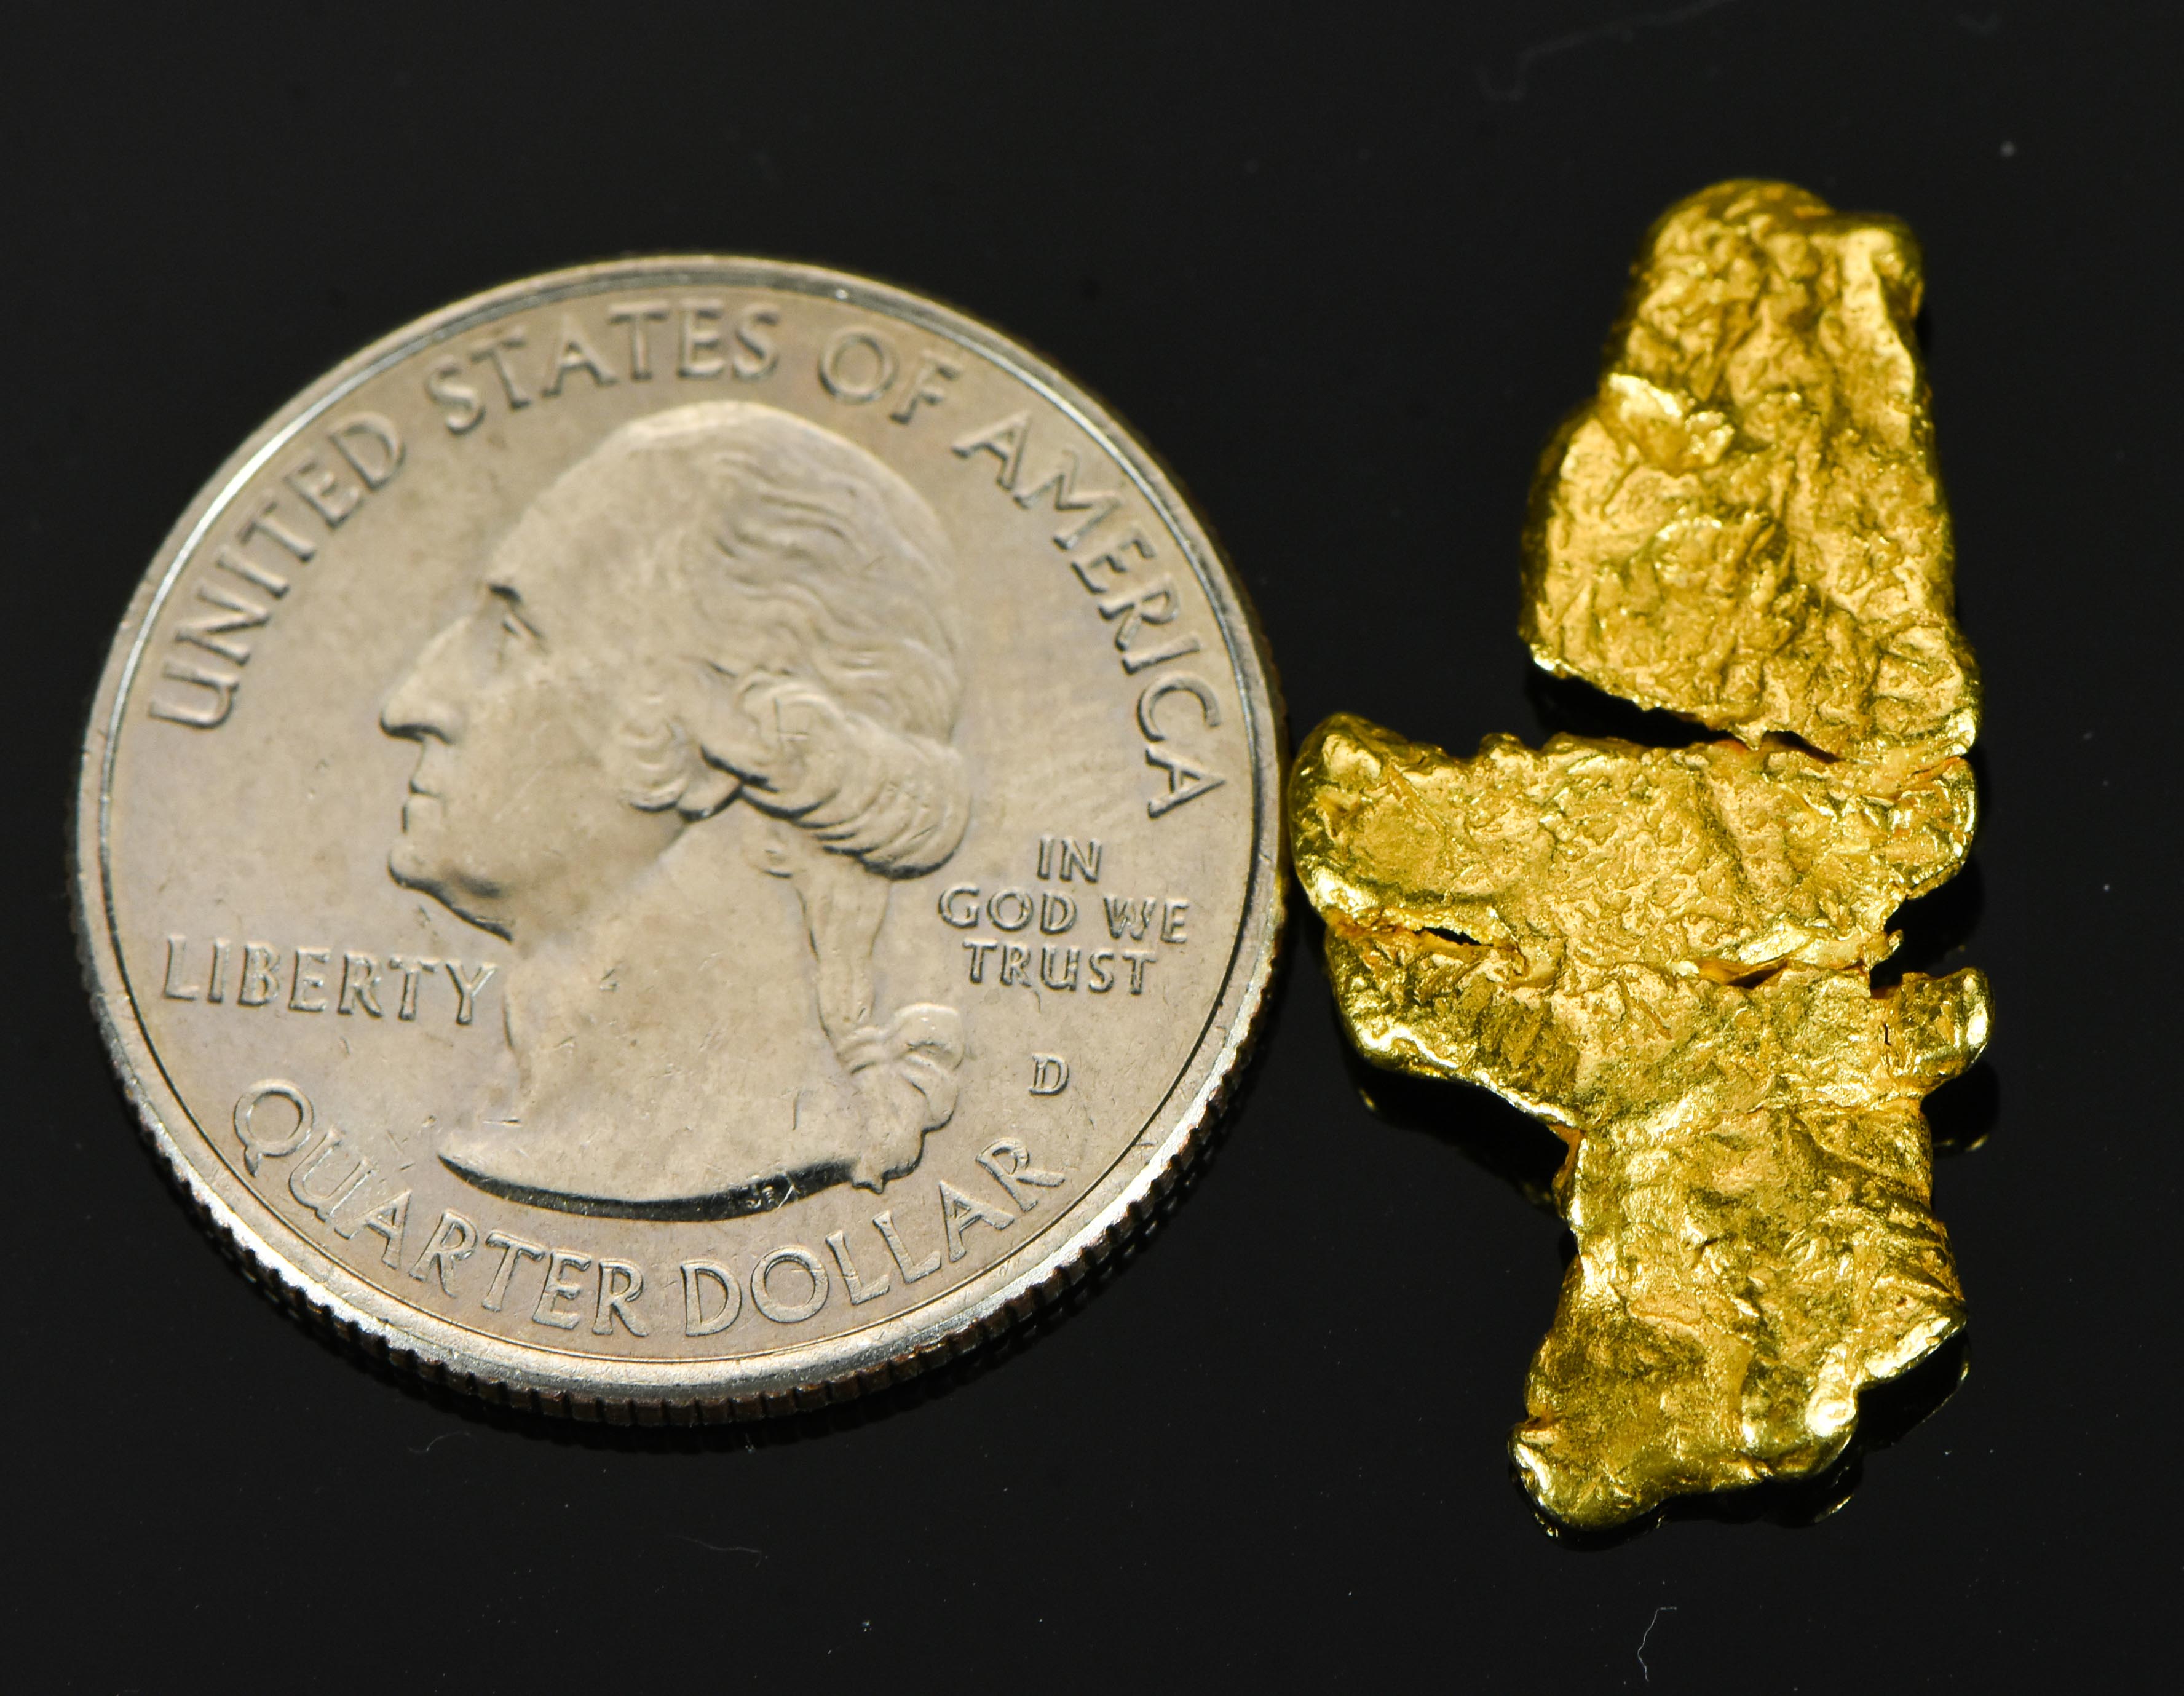 L-115 Alaskan BC Leaf Exotic Shaped Gold Nugget "Special Collection" 4.81 Grams